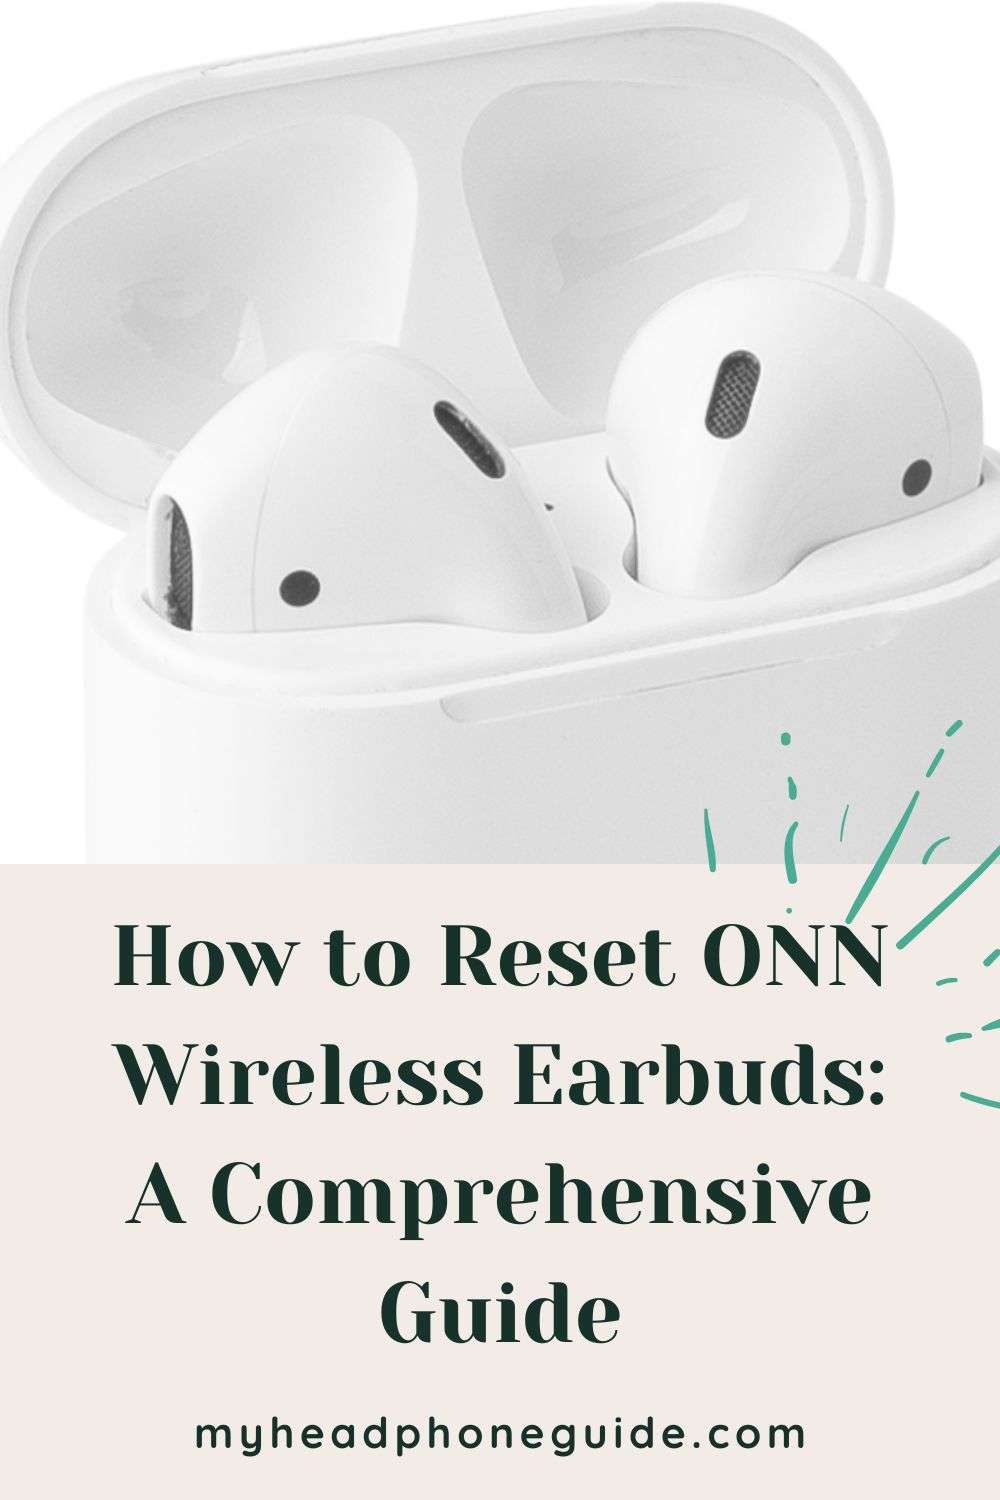 How to Reset ONN Wireless Earbuds: A Comprehensive Guide